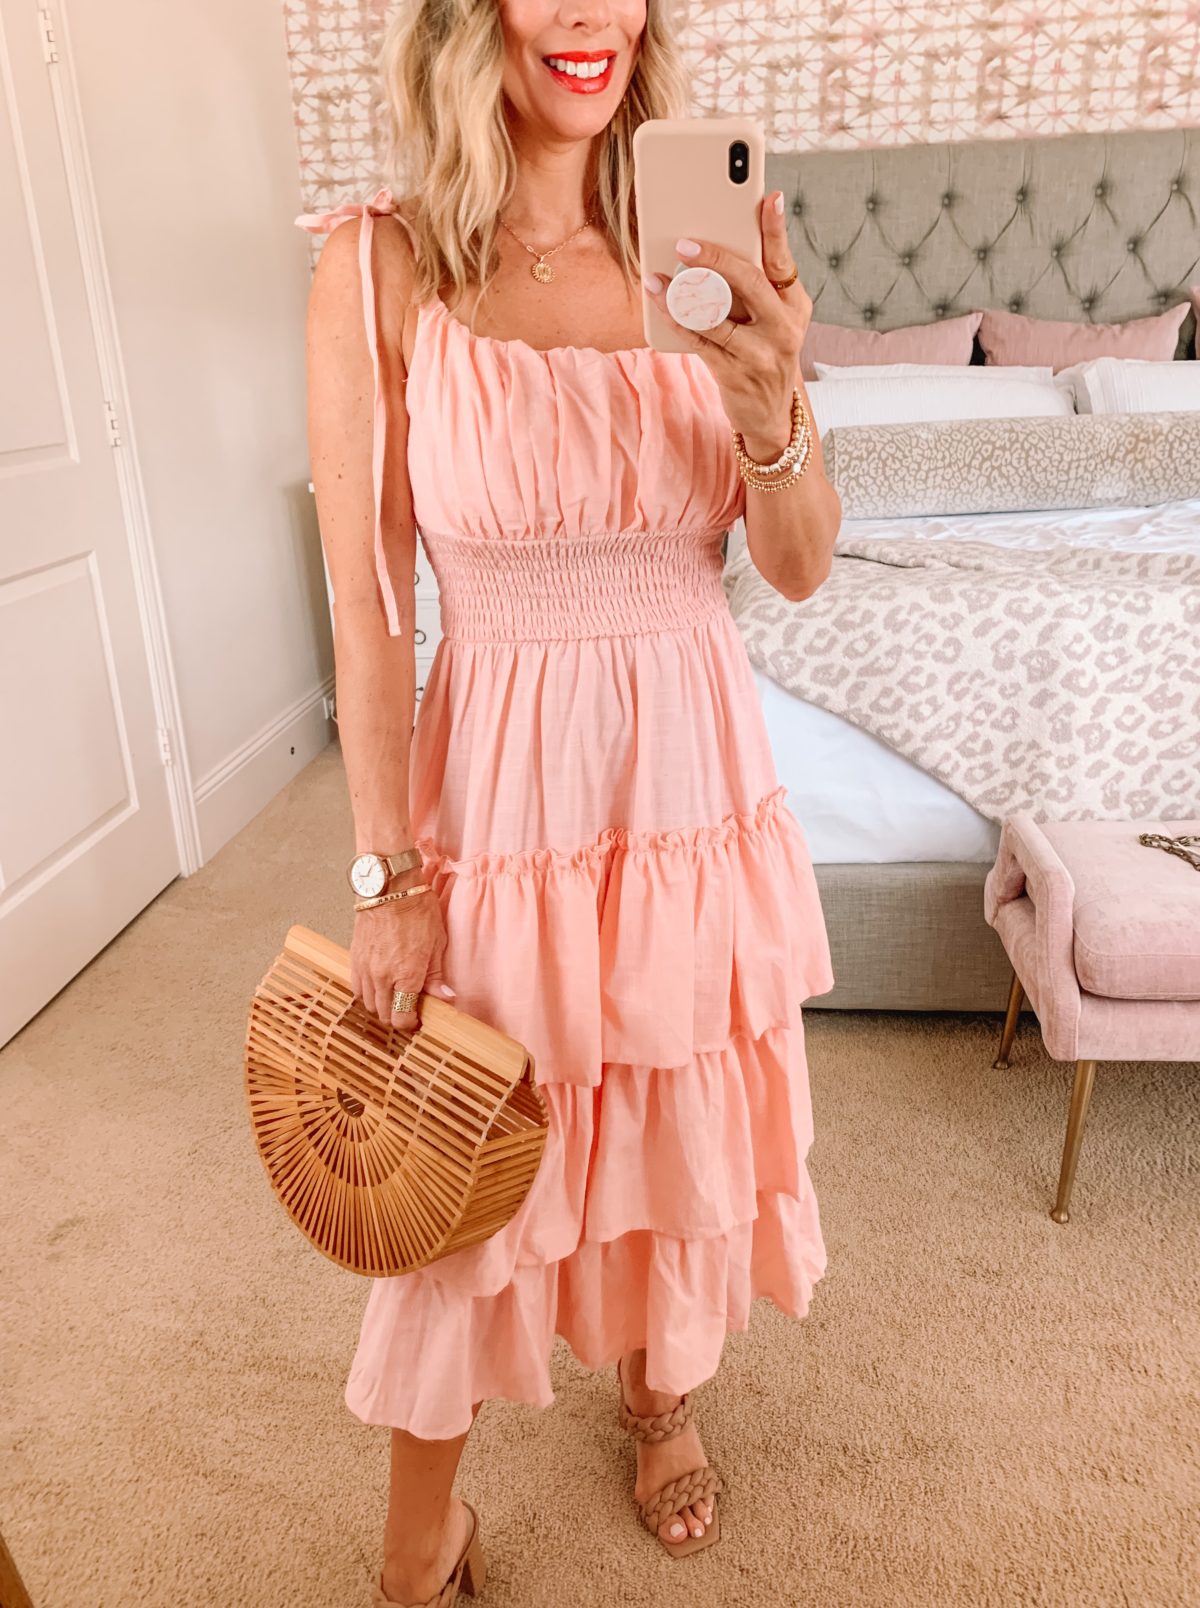 Amazon Fashion Faves, Pink Tiered Dress and Sandals with Bamboo Clutch 